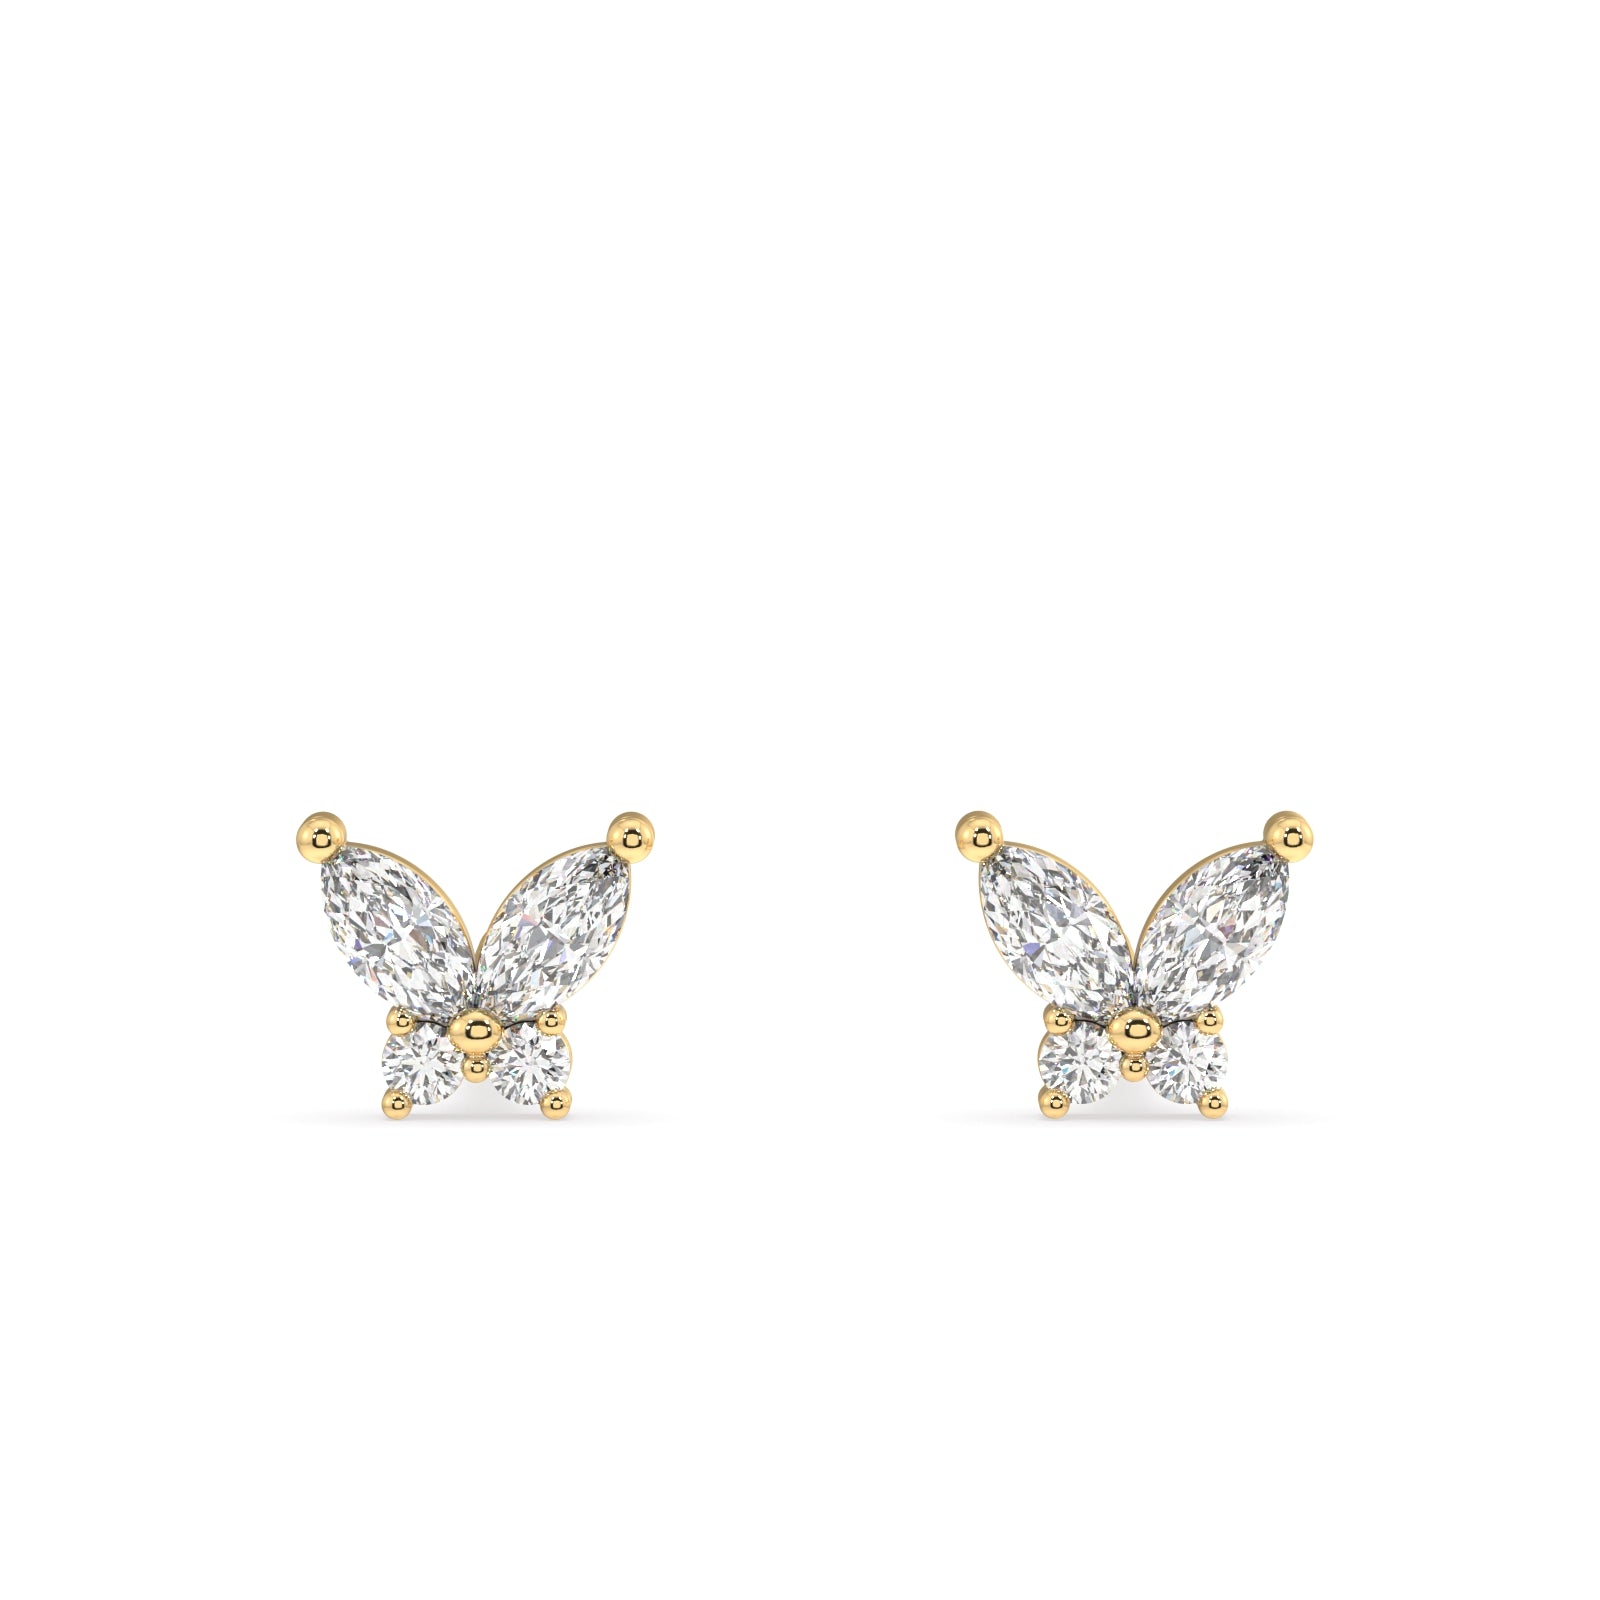 "Front View of Butterfly Stud Earrings - 14k Gold-Plated Jewelry"